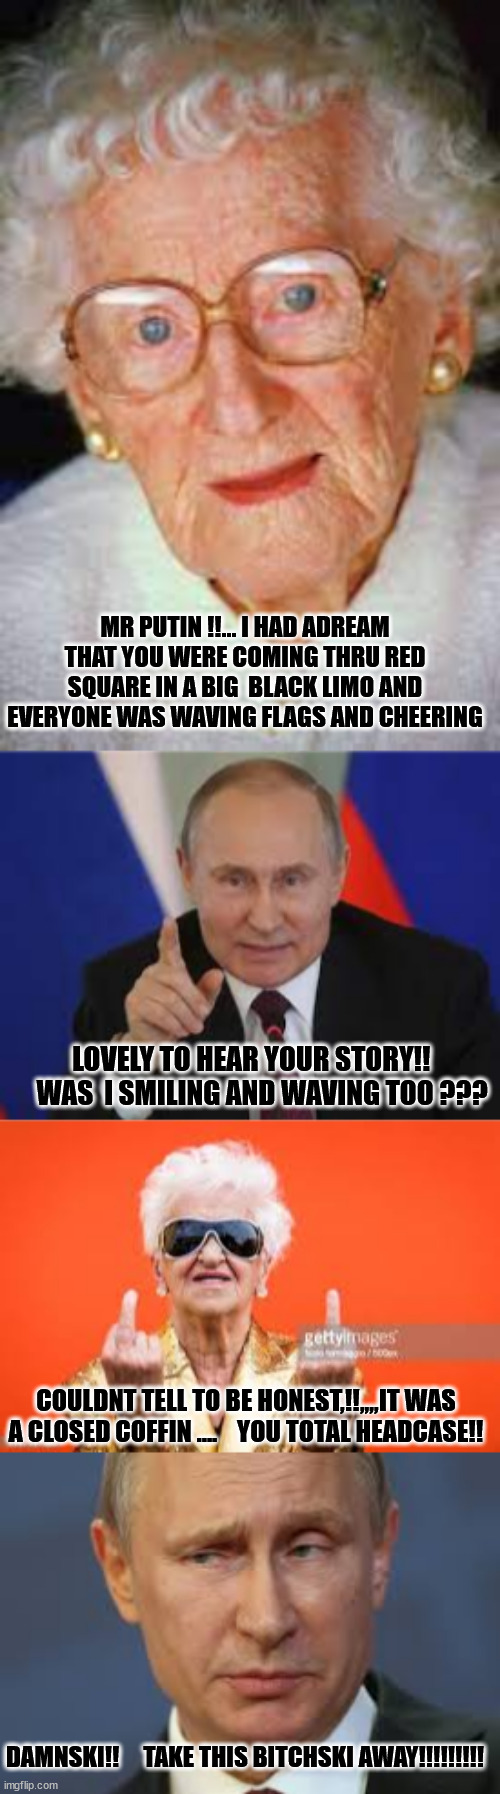 putin | MR PUTIN !!... I HAD ADREAM THAT YOU WERE COMING THRU RED SQUARE IN A BIG  BLACK LIMO AND EVERYONE WAS WAVING FLAGS AND CHEERING; LOVELY TO HEAR YOUR STORY!!     WAS  I SMILING AND WAVING TOO ??? COULDNT TELL TO BE HONEST,!!,,,,IT WAS A CLOSED COFFIN ....    YOU TOTAL HEADCASE!! DAMNSKI!!     TAKE THIS BITCHSKI AWAY!!!!!!!!! | made w/ Imgflip meme maker